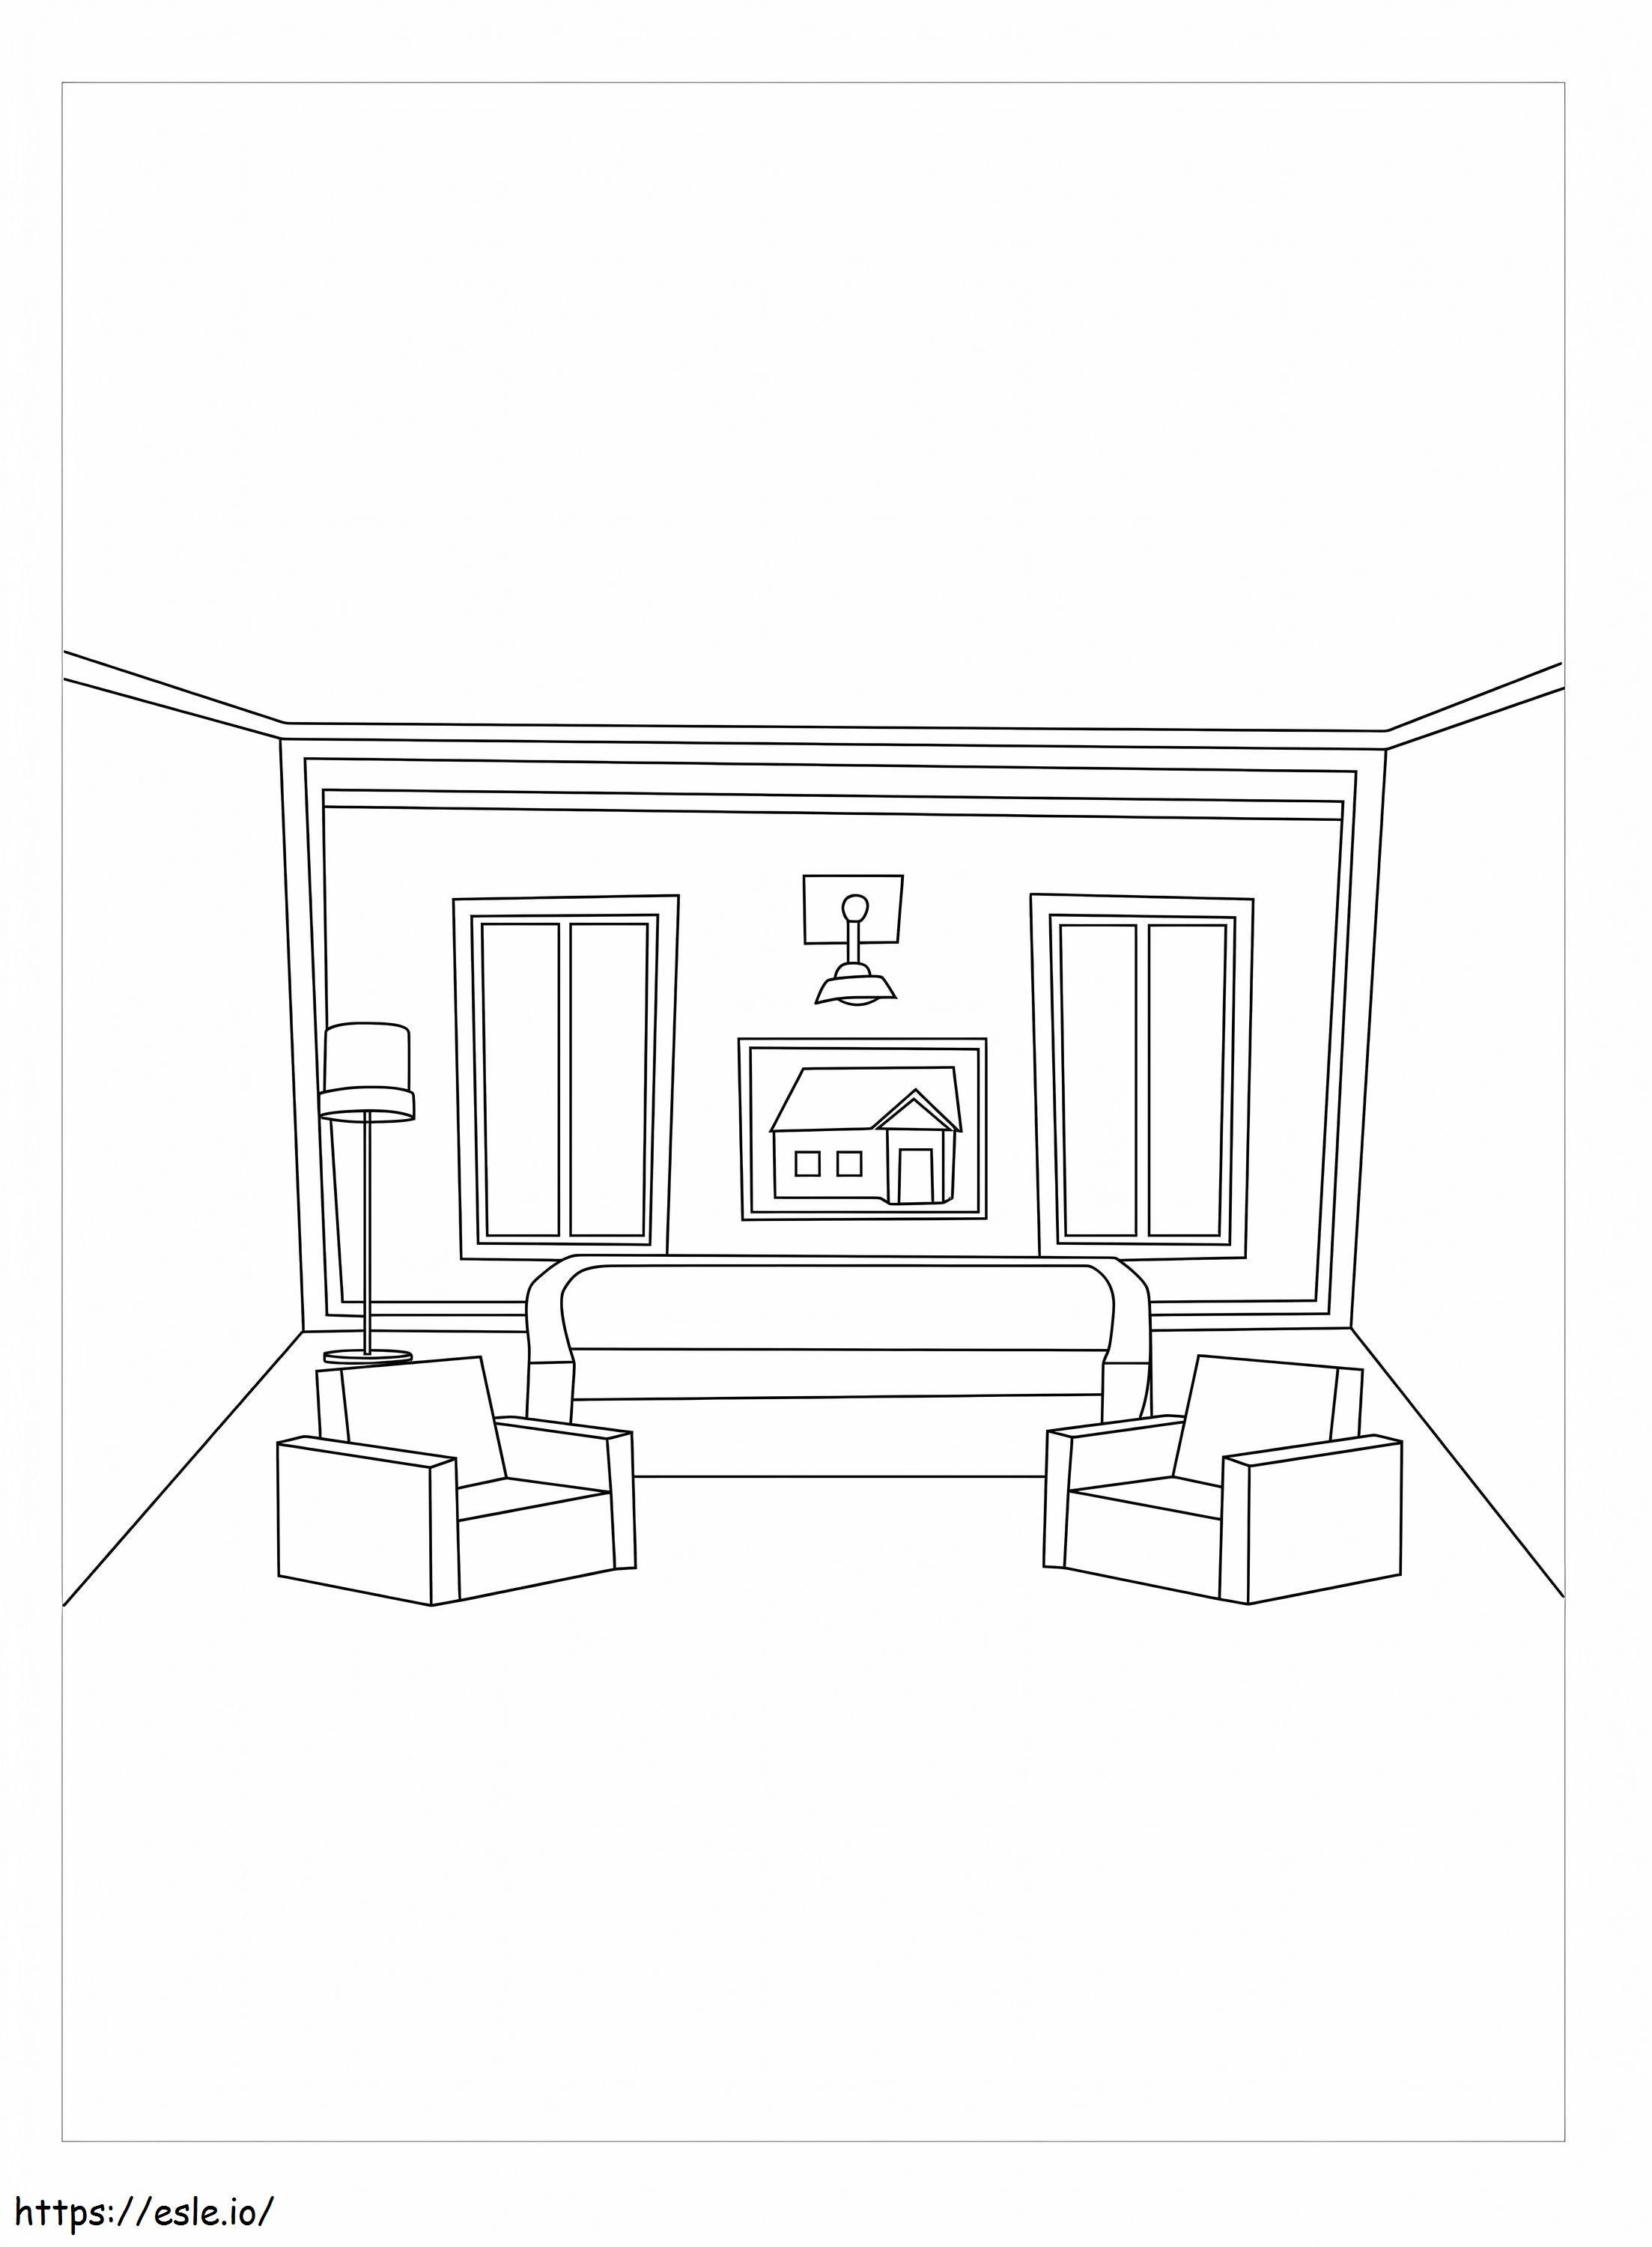 Living Room In Perspective coloring page